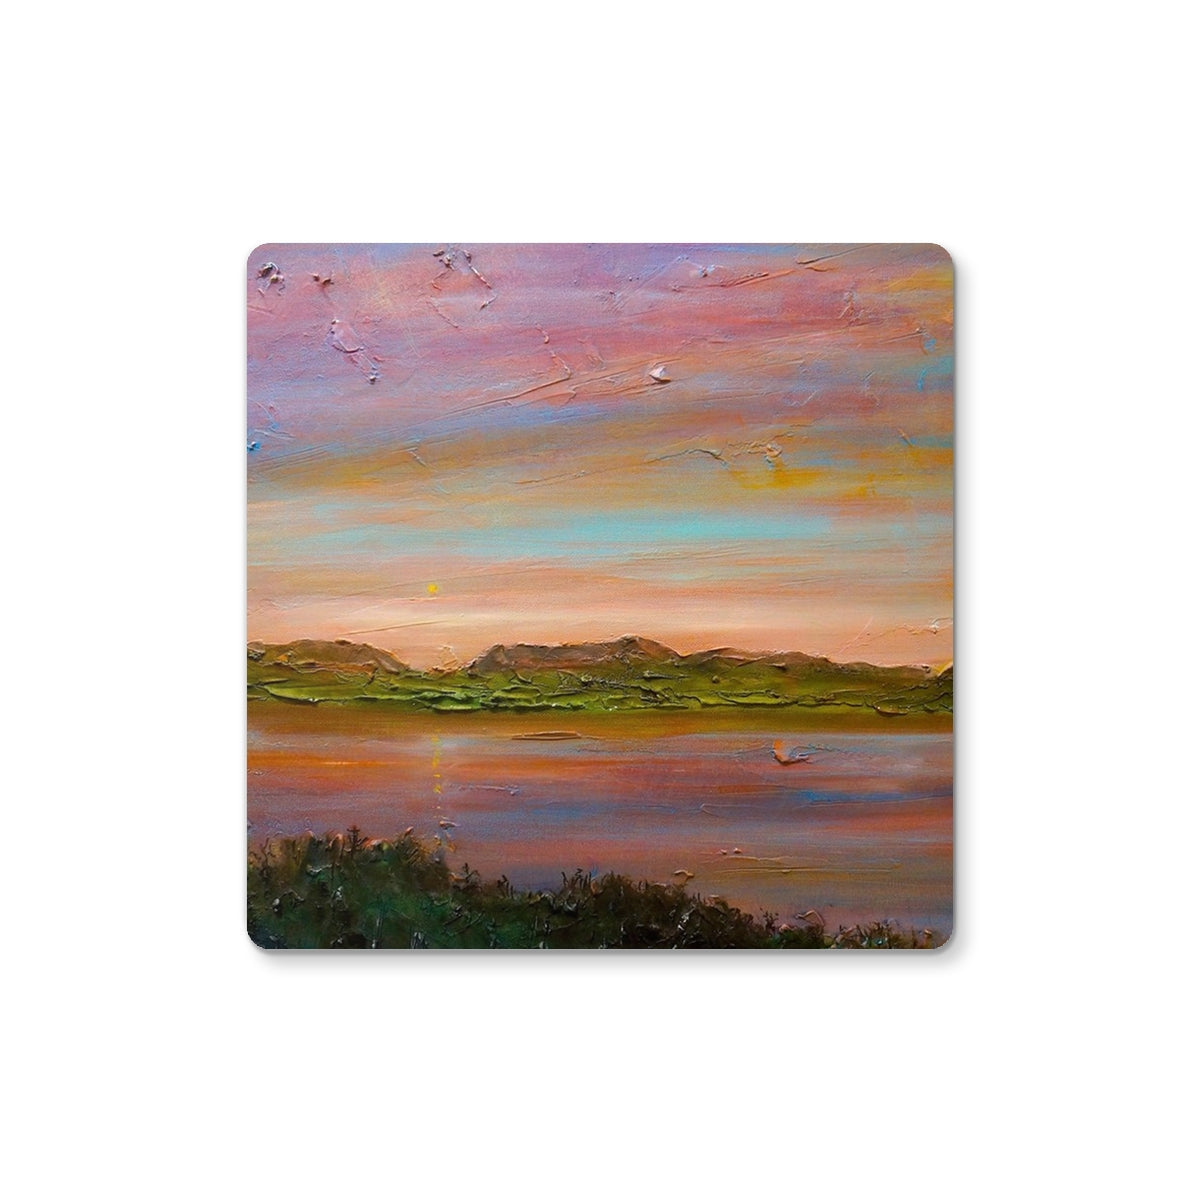 Gourock Golf Club Sunset Art Gifts Coaster-Homeware-River Clyde Art Gallery-Single Coaster-Paintings, Prints, Homeware, Art Gifts From Scotland By Scottish Artist Kevin Hunter